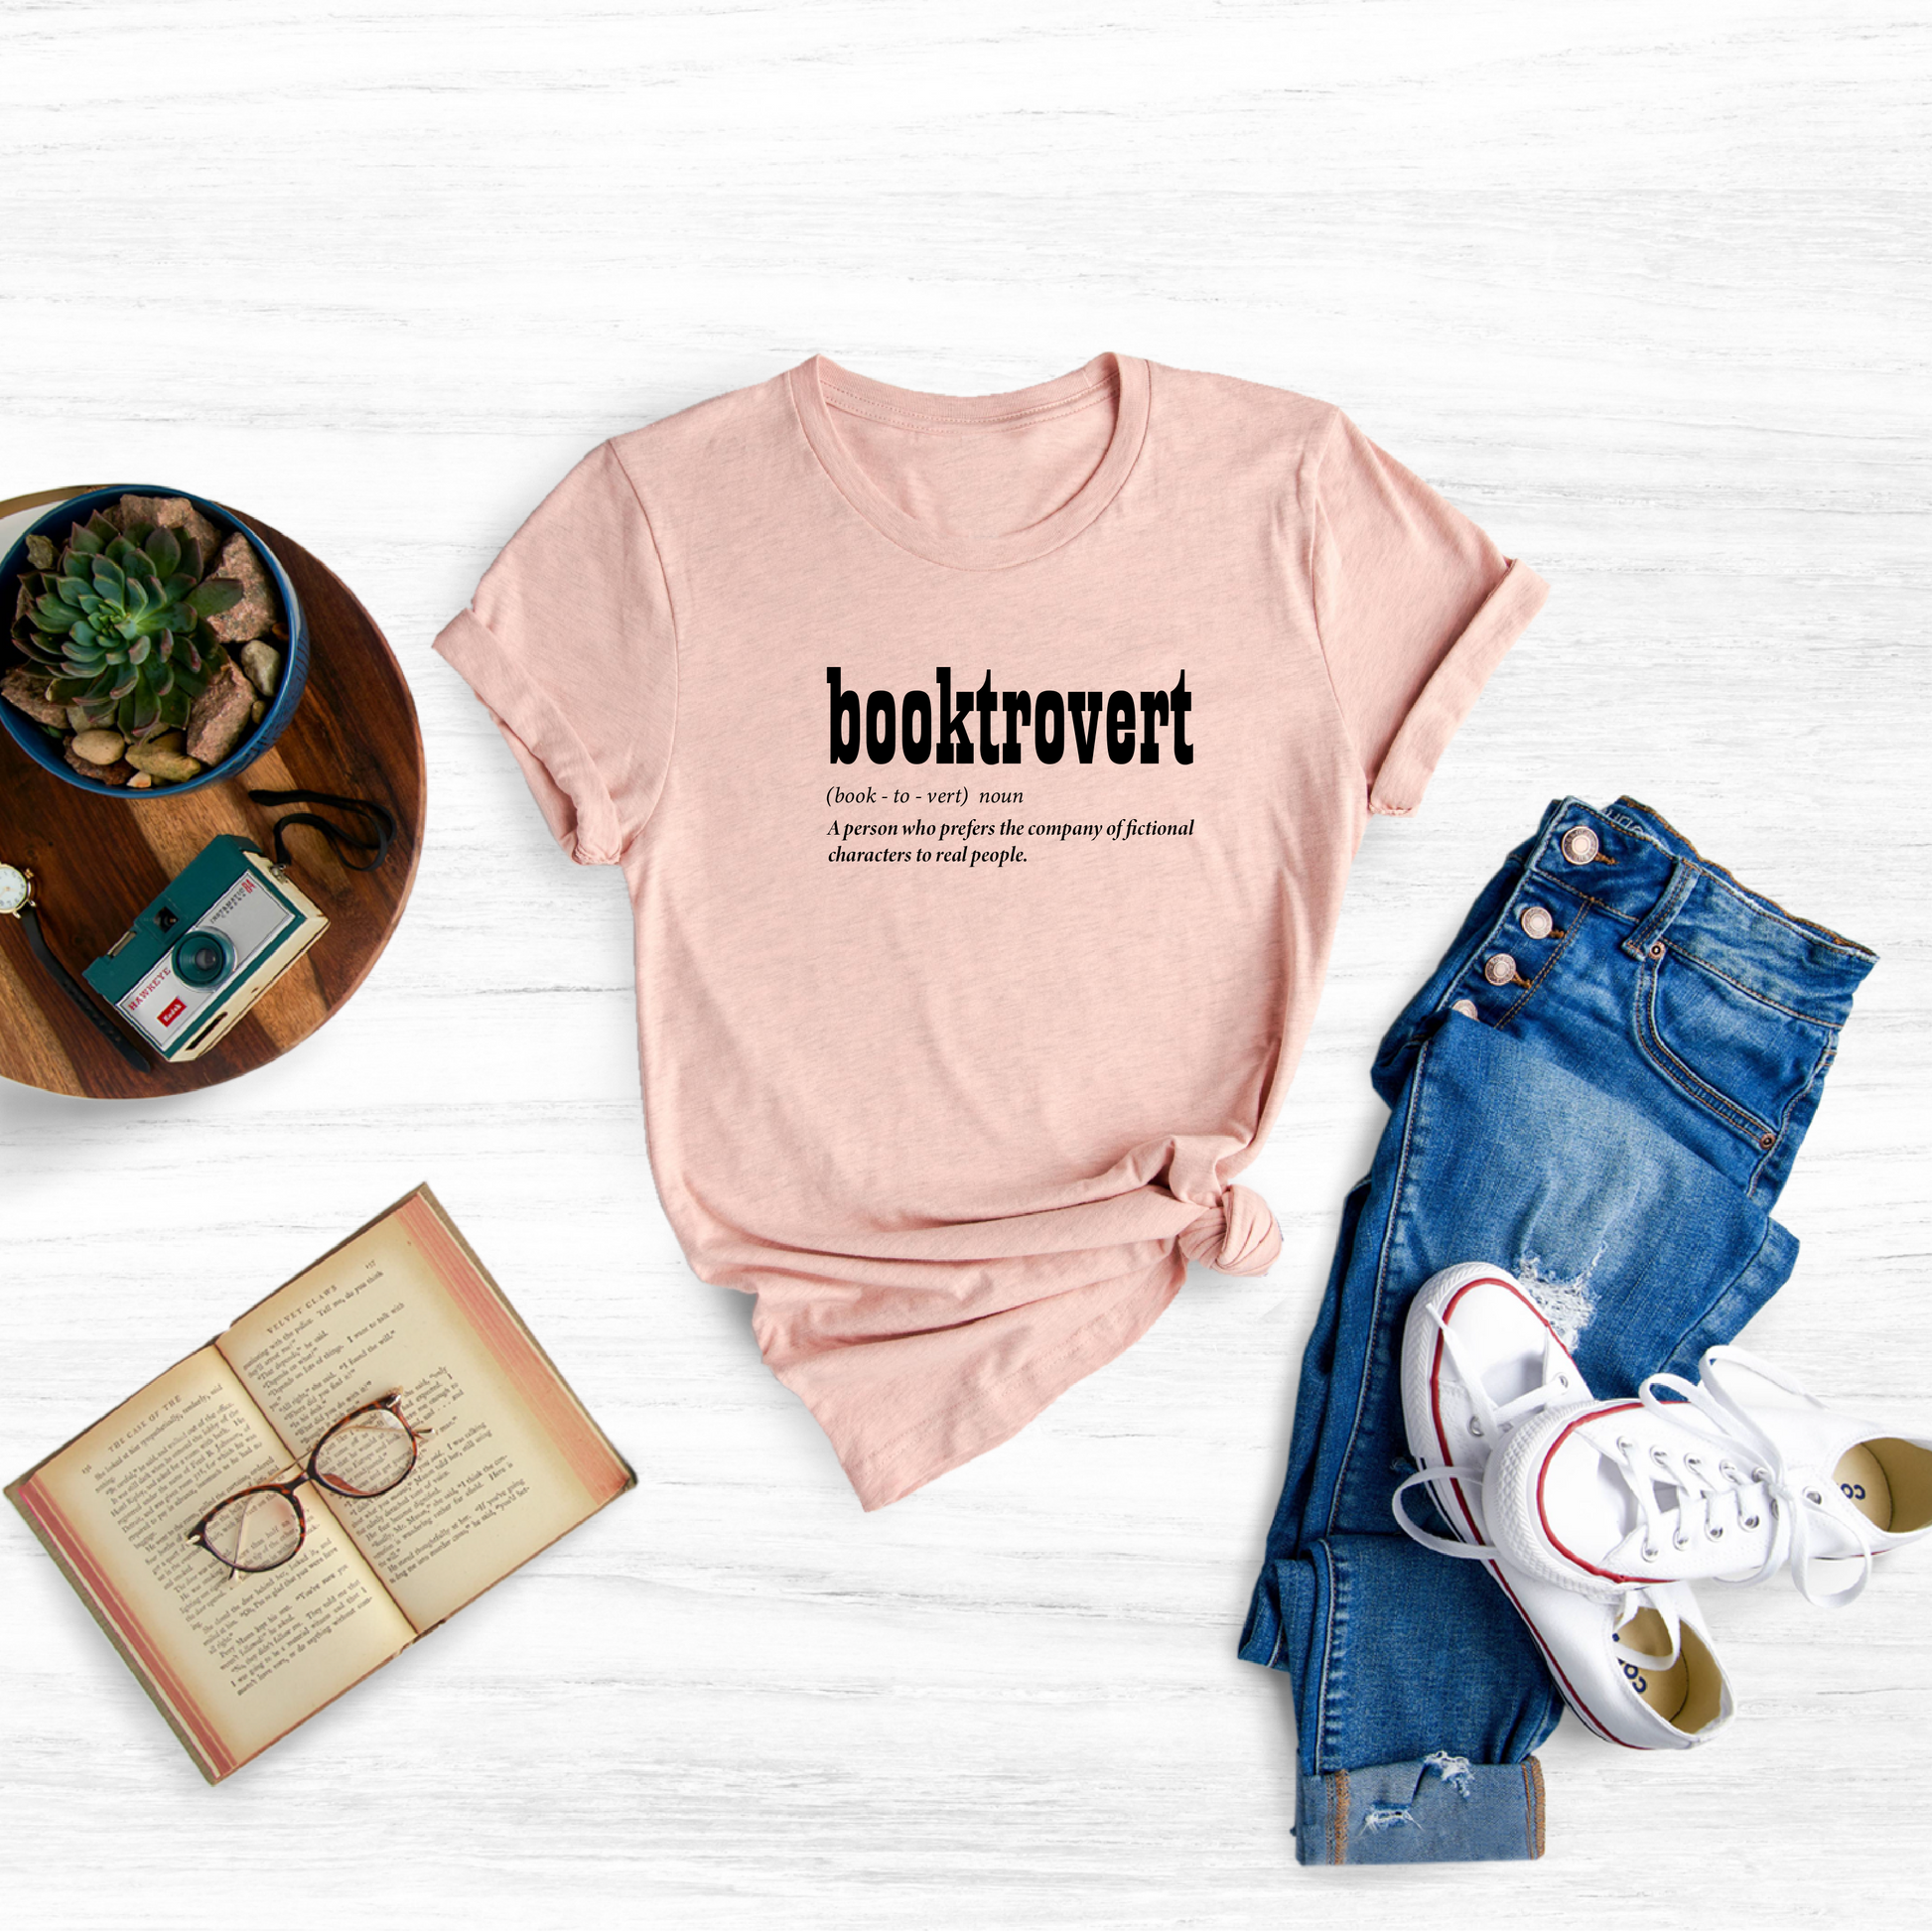 For women who love books and love to be introverted, this T-shirt is perfect for you! It's a reminder that there's nothing wrong with loving to spend time alone with a good book. In fact, it's a great way to relax, de-stress, and learn new things